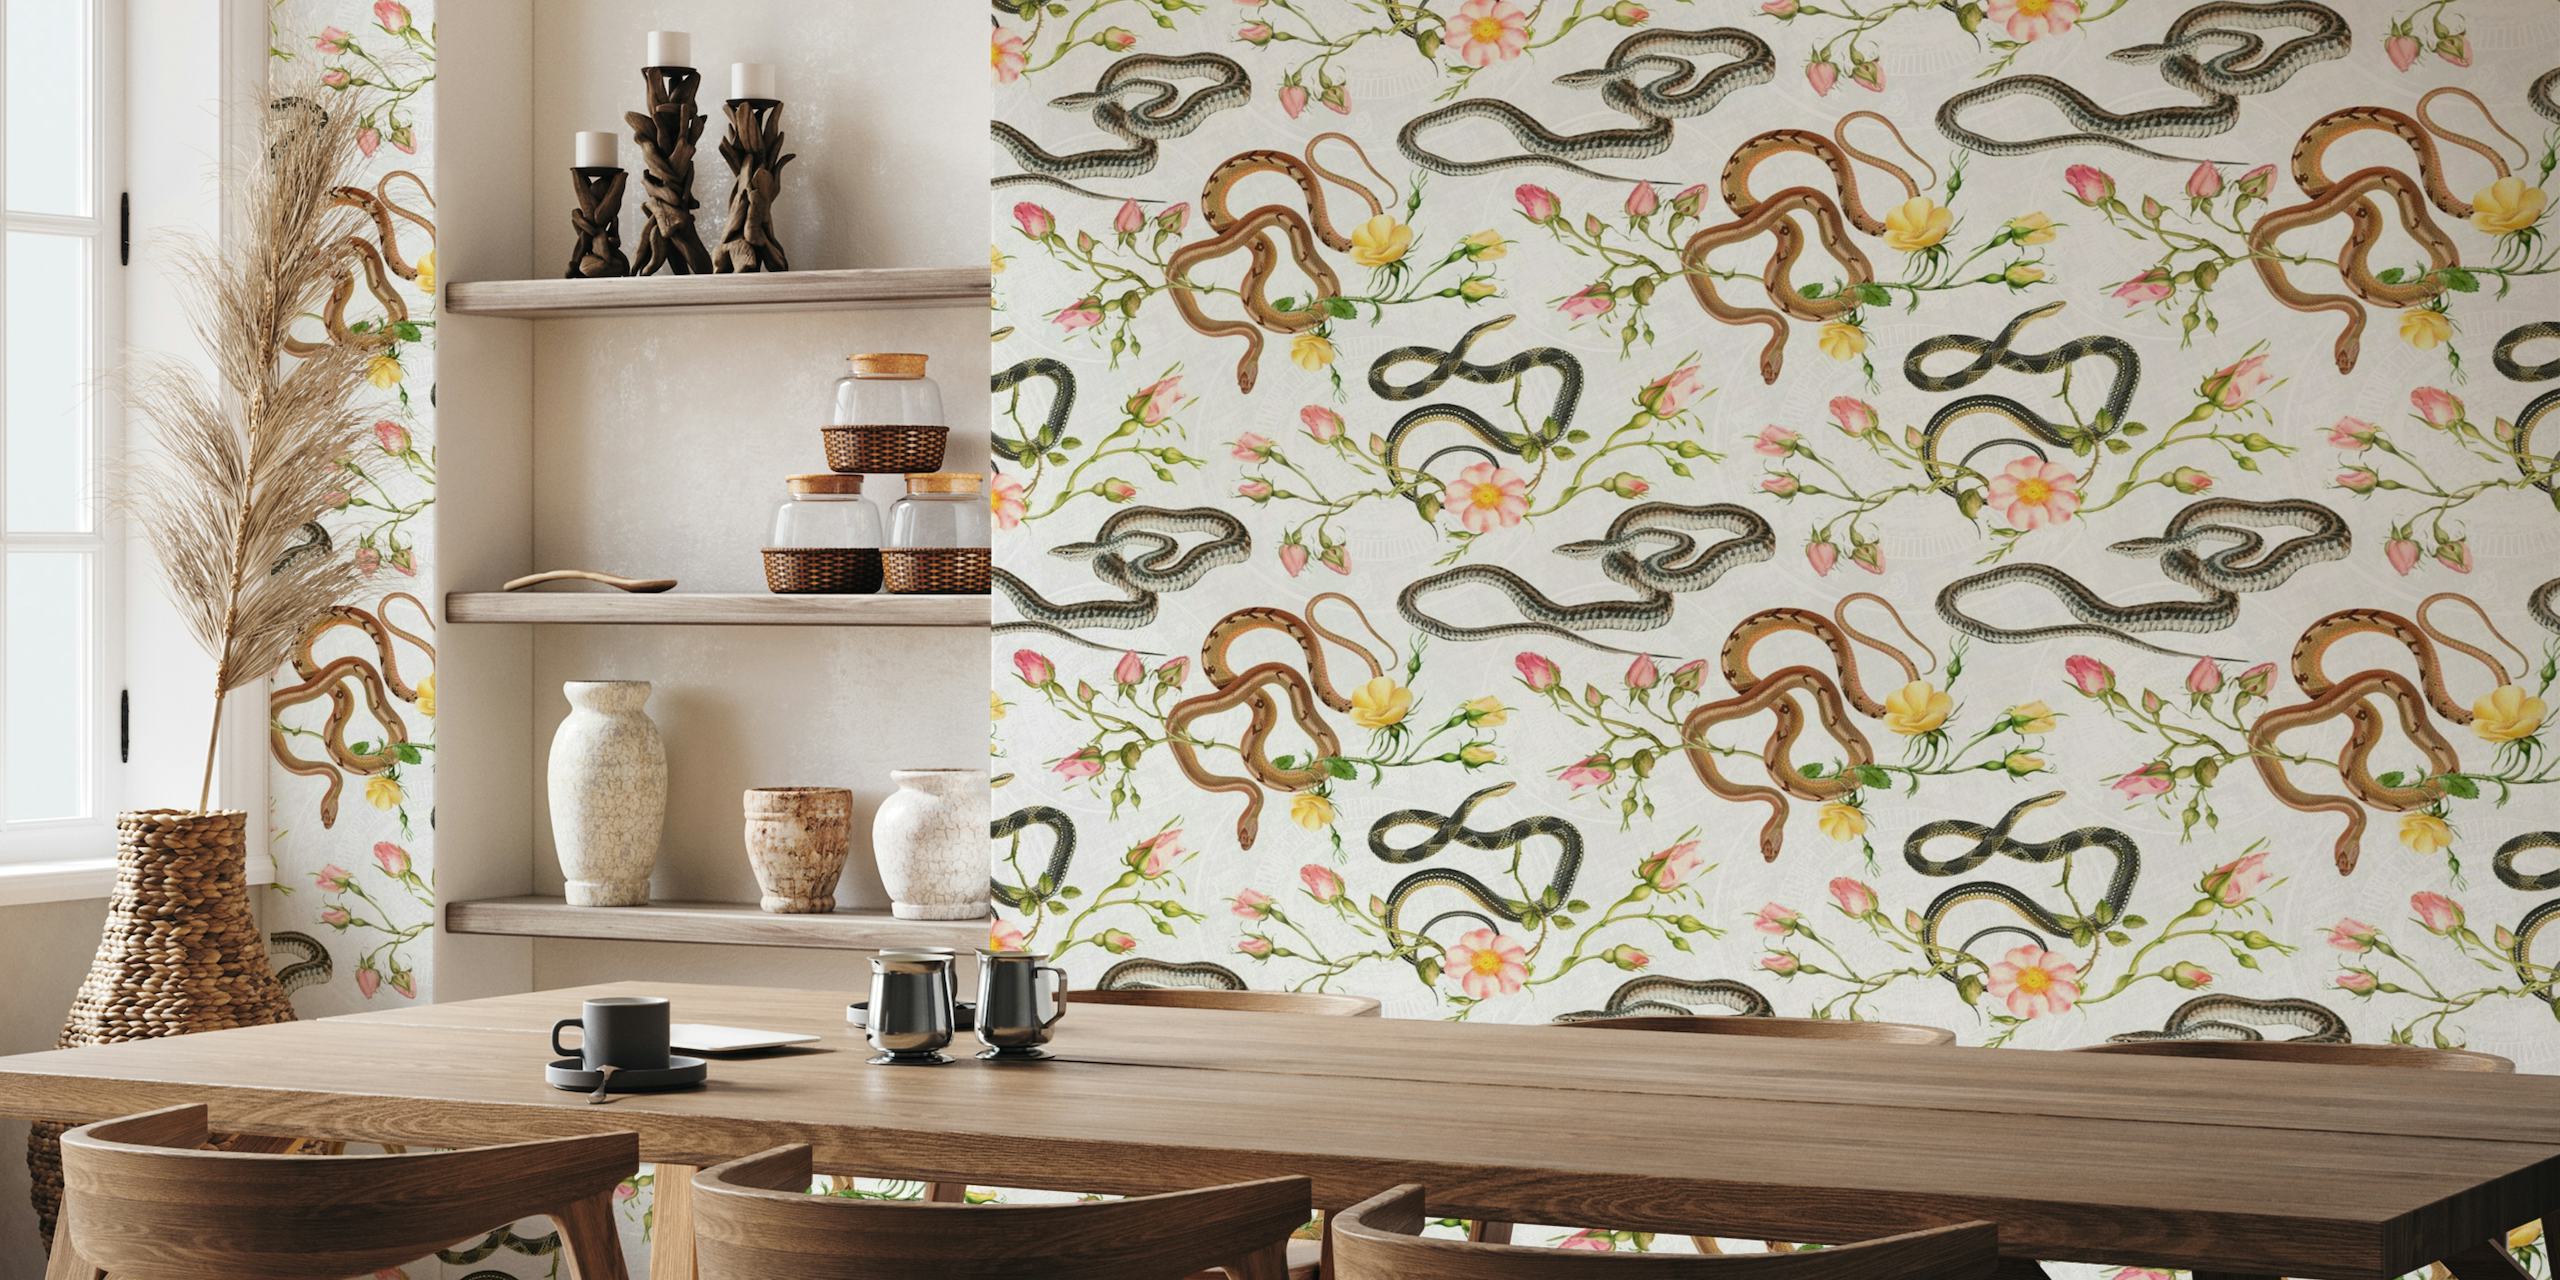 Snakes, roses and chinese calendar in white wallpaper